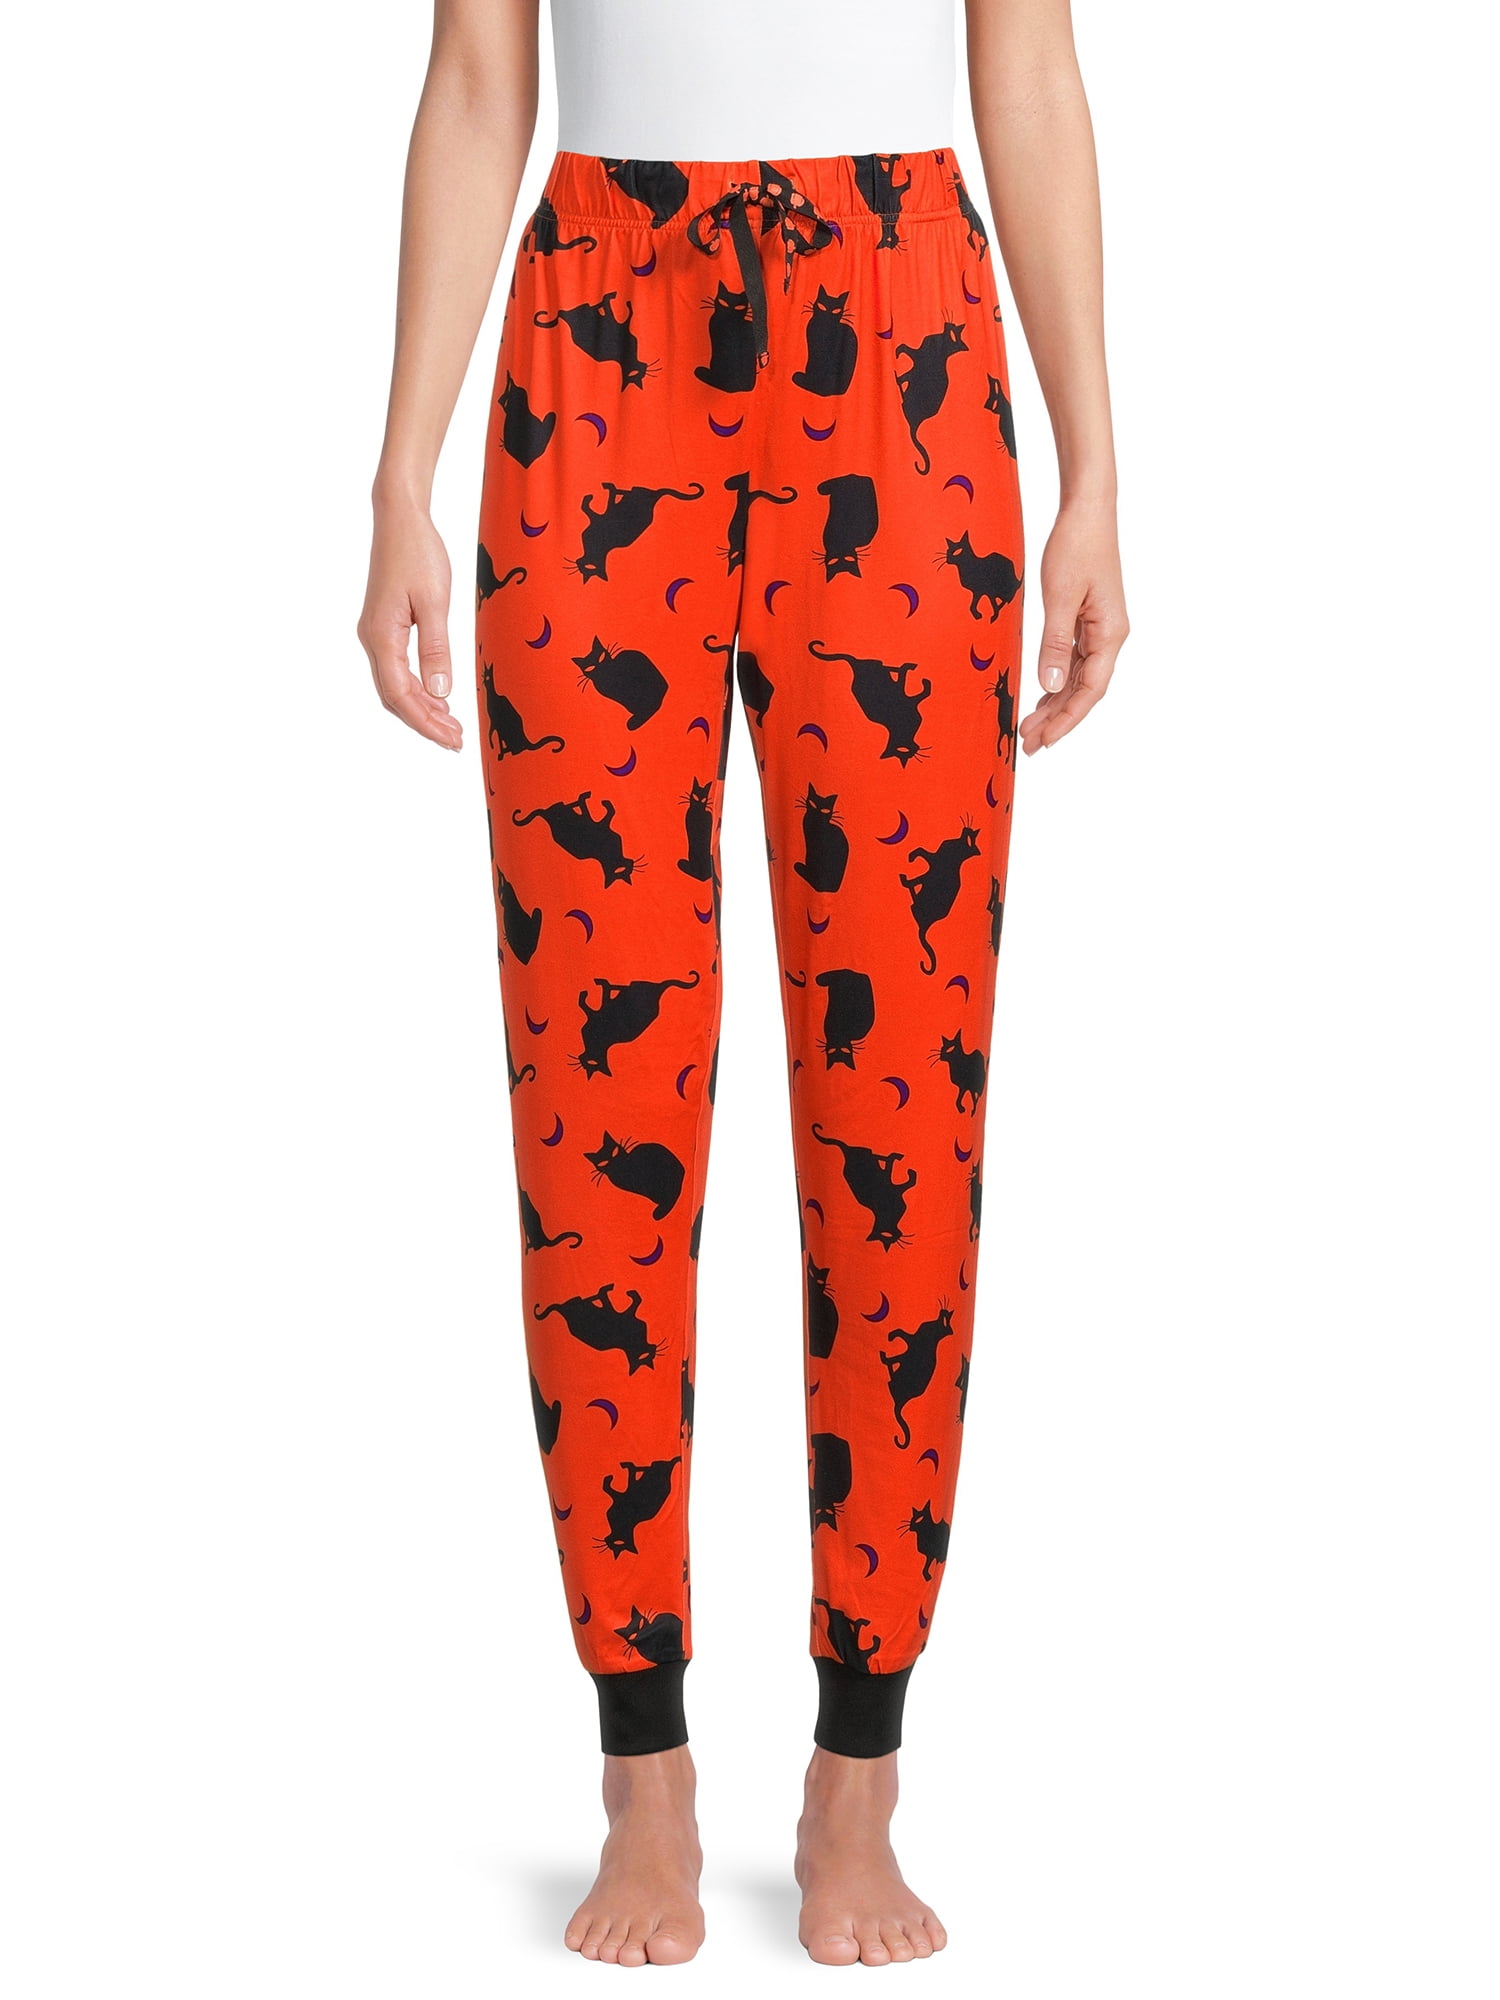 Briefly Stated Nightmare Before Christmas Black Jogger Sleep Pants 